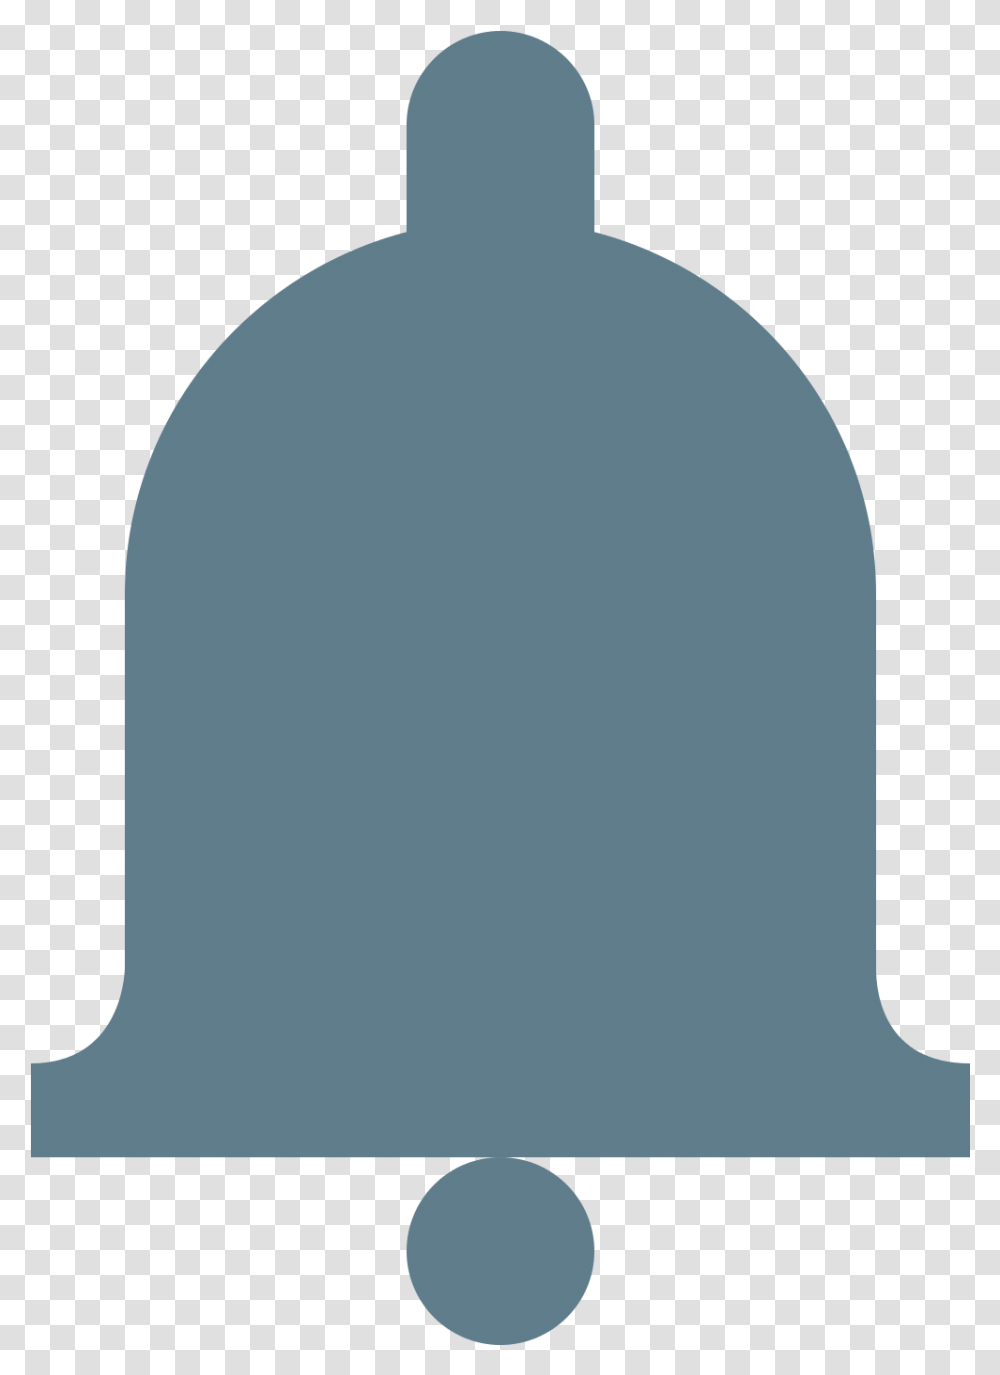 Notification Bell Small Youtube Bell Icon Ghanta, Silhouette, Clothing, Pottery, Jar Transparent Png